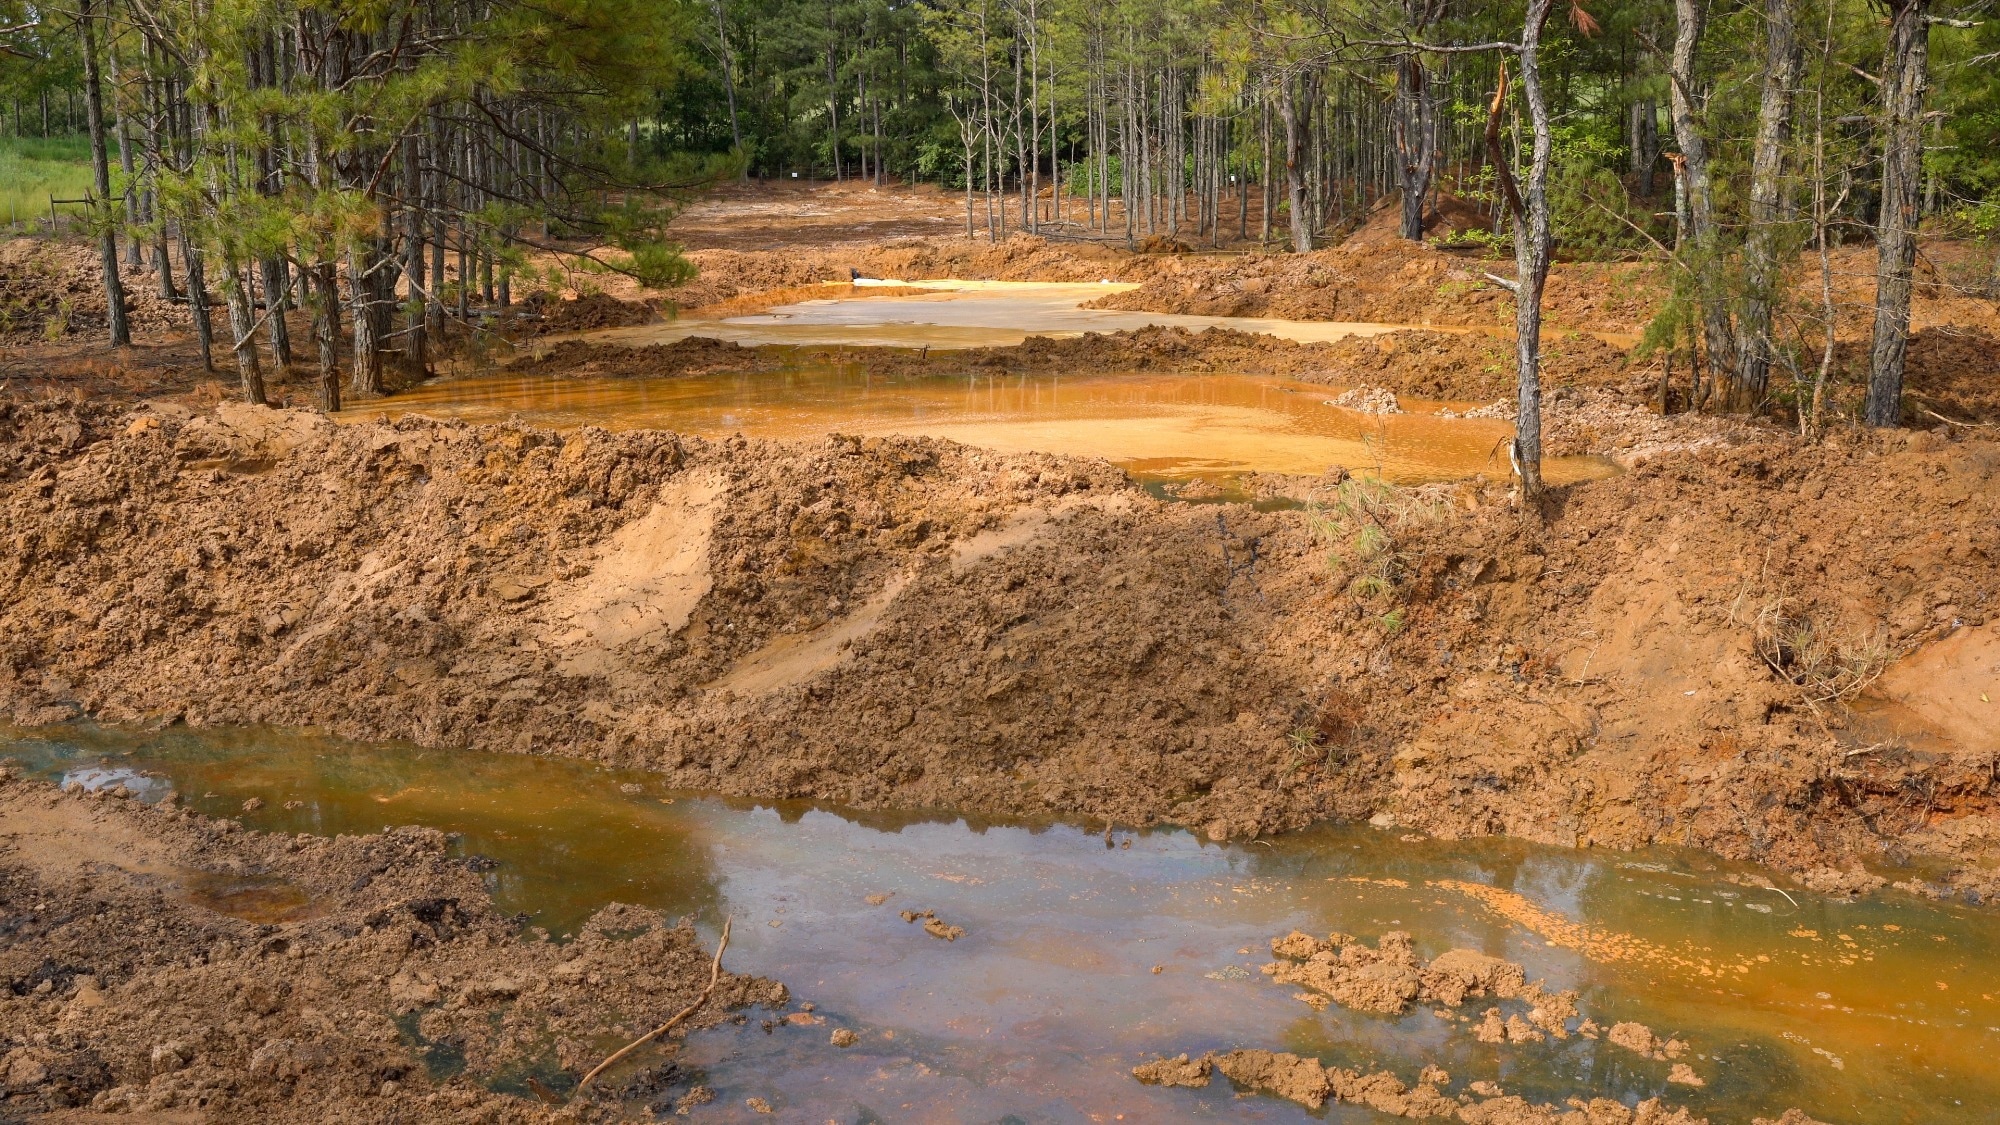 Davis Mill Creek runs through the Copperhill mine site, picking up acid mine drainage before entering a water treatment plant and then the Ocoee River.